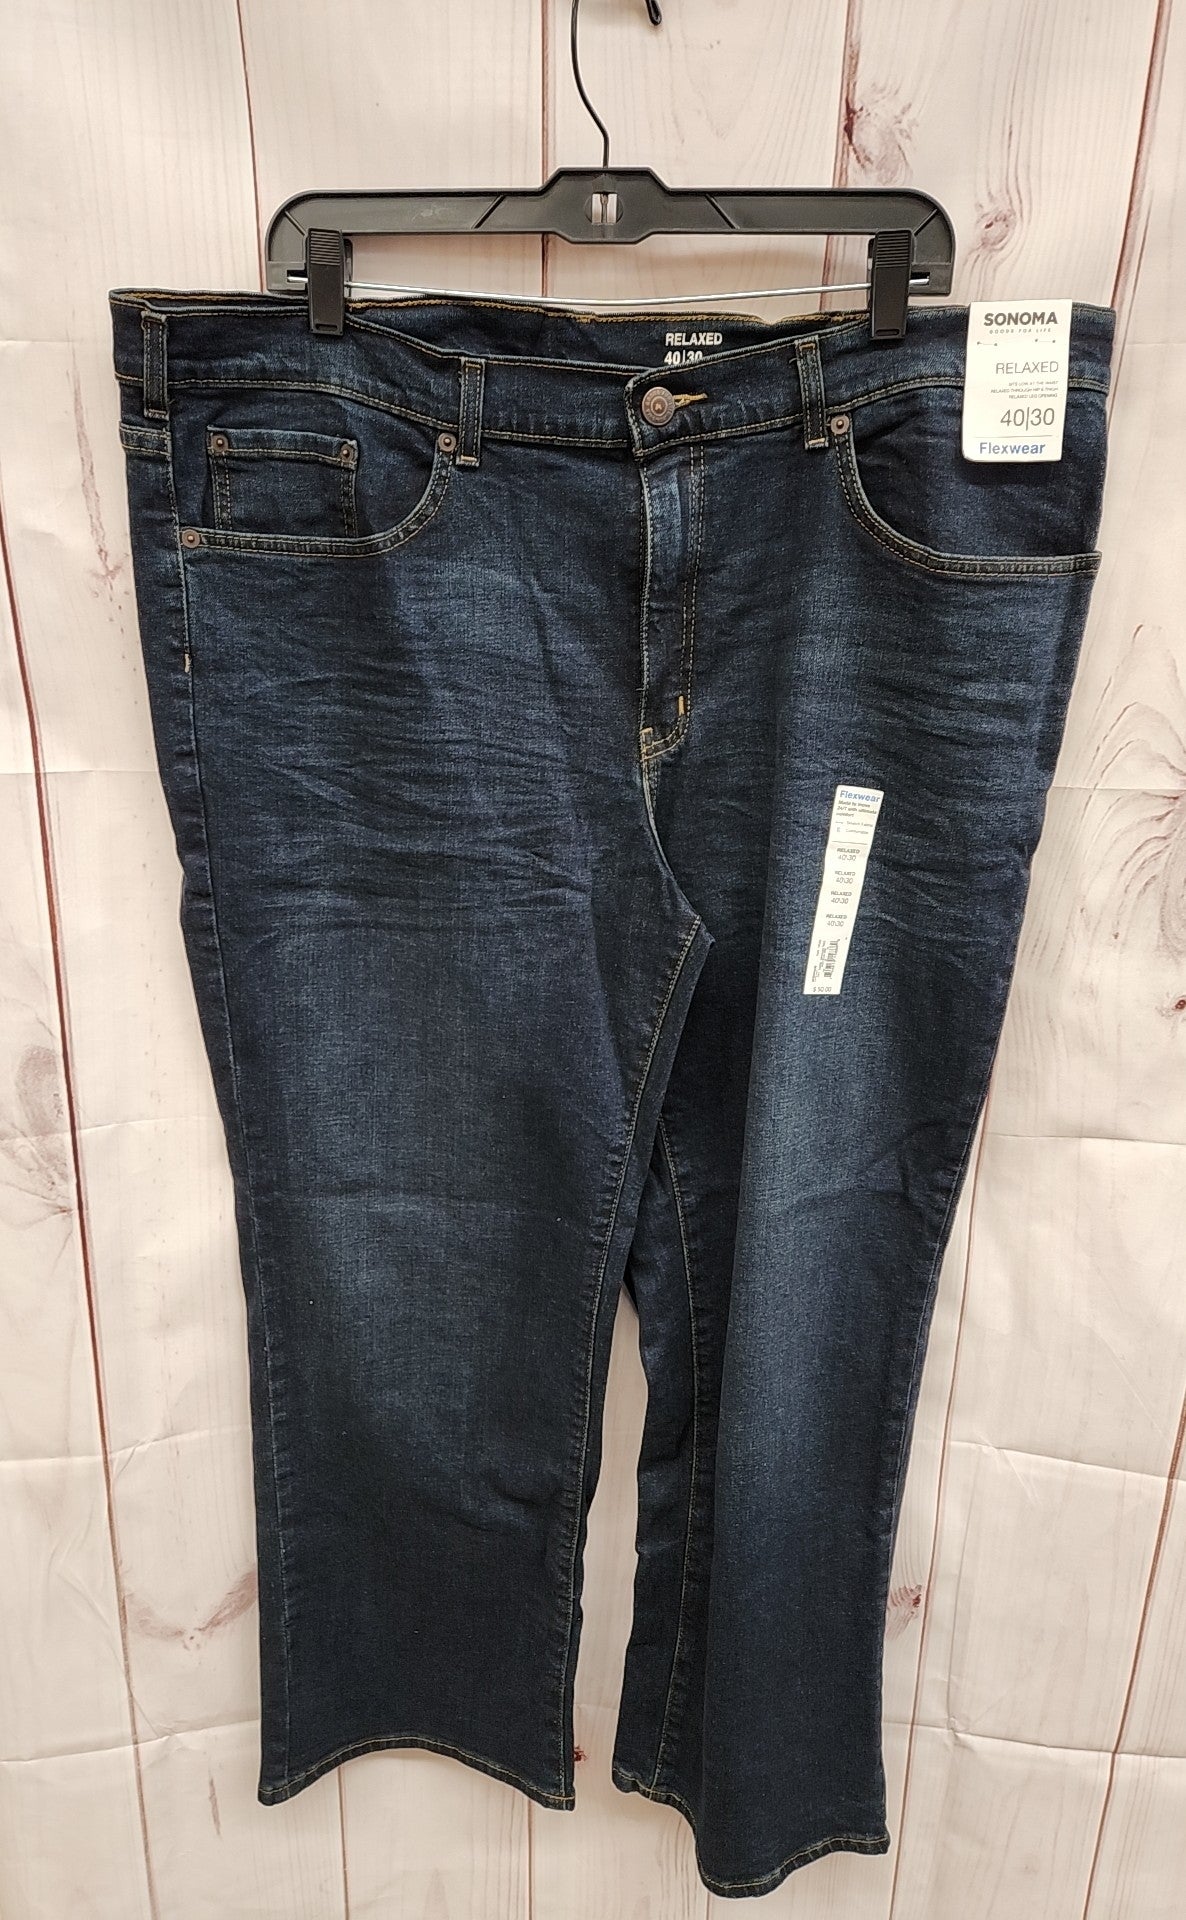 Sonoma Men's Size 40x30 Relaxed Blue Jeans NWT